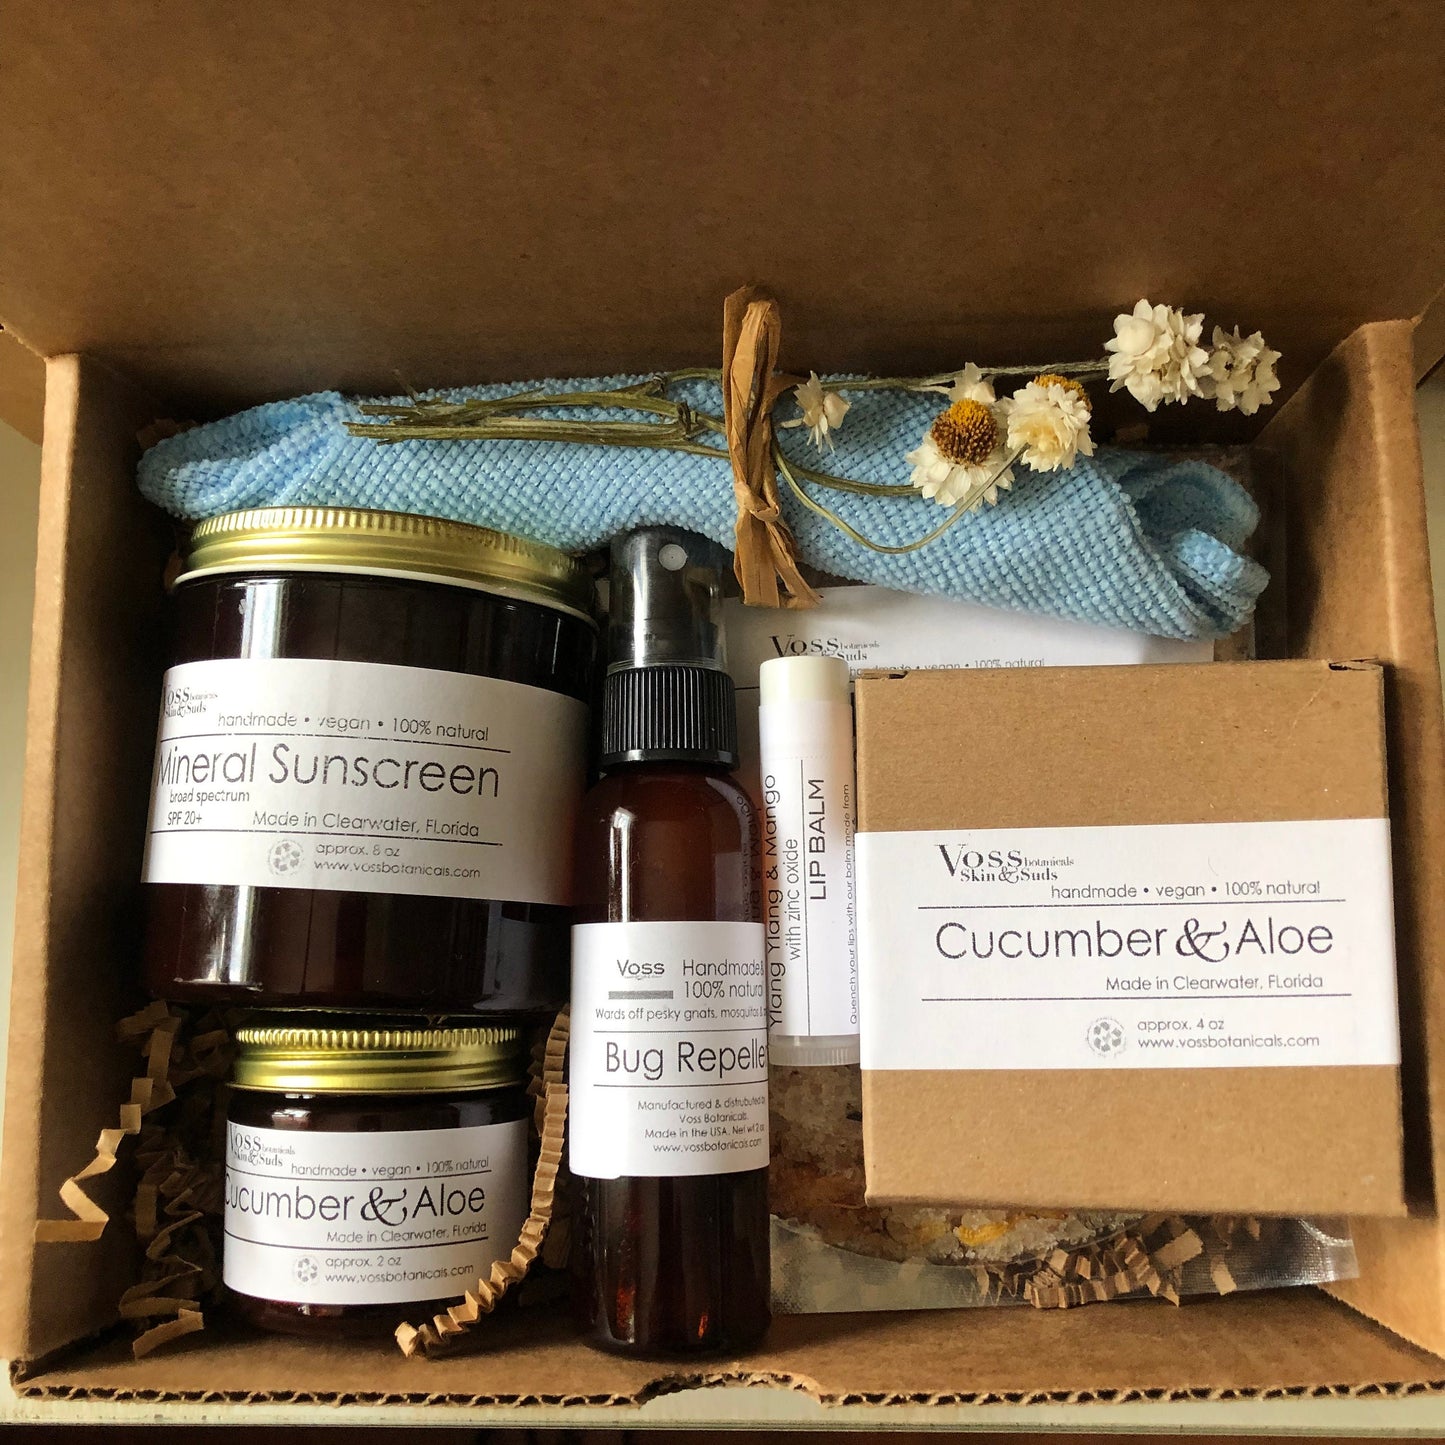 care package for outdoors PRODUCT FOOTPRINTS Natural ingredients Phthalate, Sulfate, Petroleum & Paraben Free Vegan Free of Synthetic Fragrances Free of Synthetic Dyes GMO & Gluten-free Non Toxic Handmade Sustainable Innovation Made in the USA Cruelty Free Zero Waste Low Carbon Footprint eco friendly   Holiday care package gift box gift for her relaxation gift self care box self care gift box spa gift box spa gift set thank you gift box birthday gift new mom gift relaxing bath set spa gift set spa kit